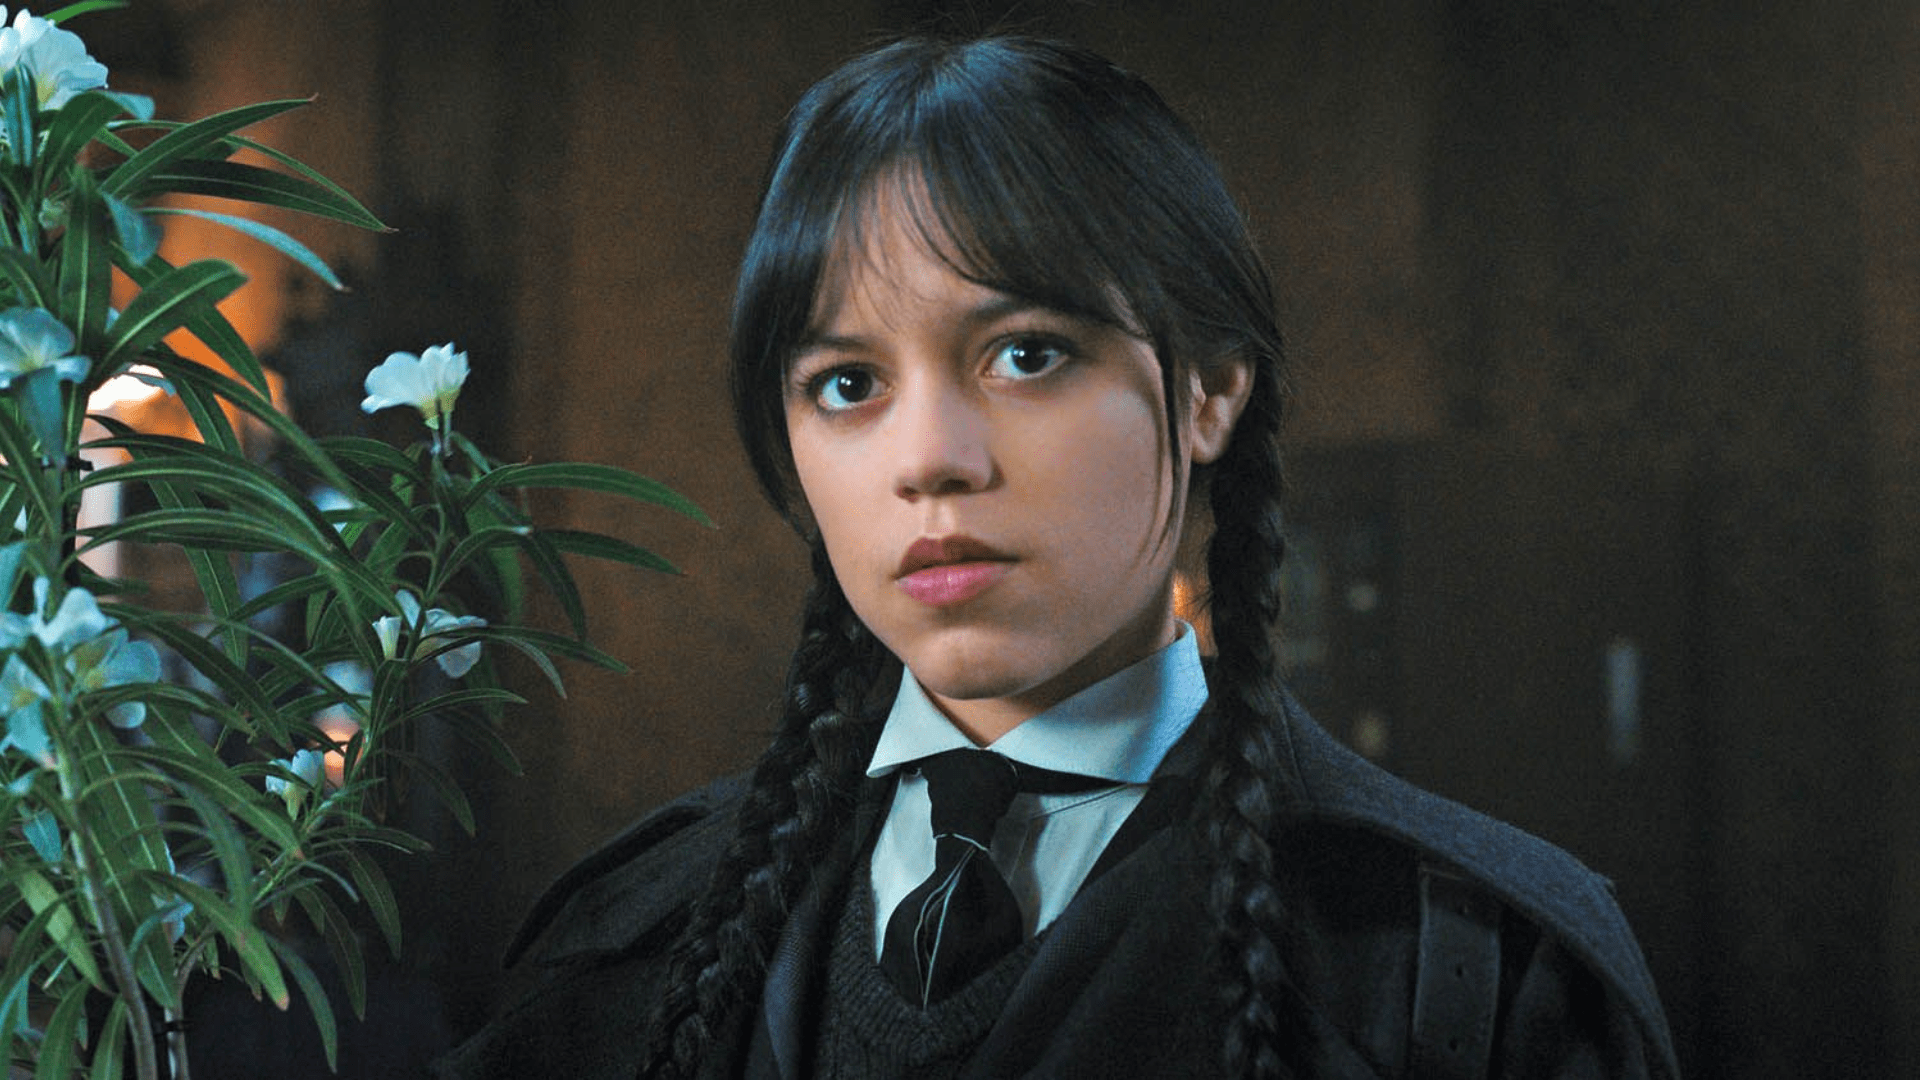 Wednesday Quotes - Memorable Wednesday Quotes From Netflix's Addam's Family Remake